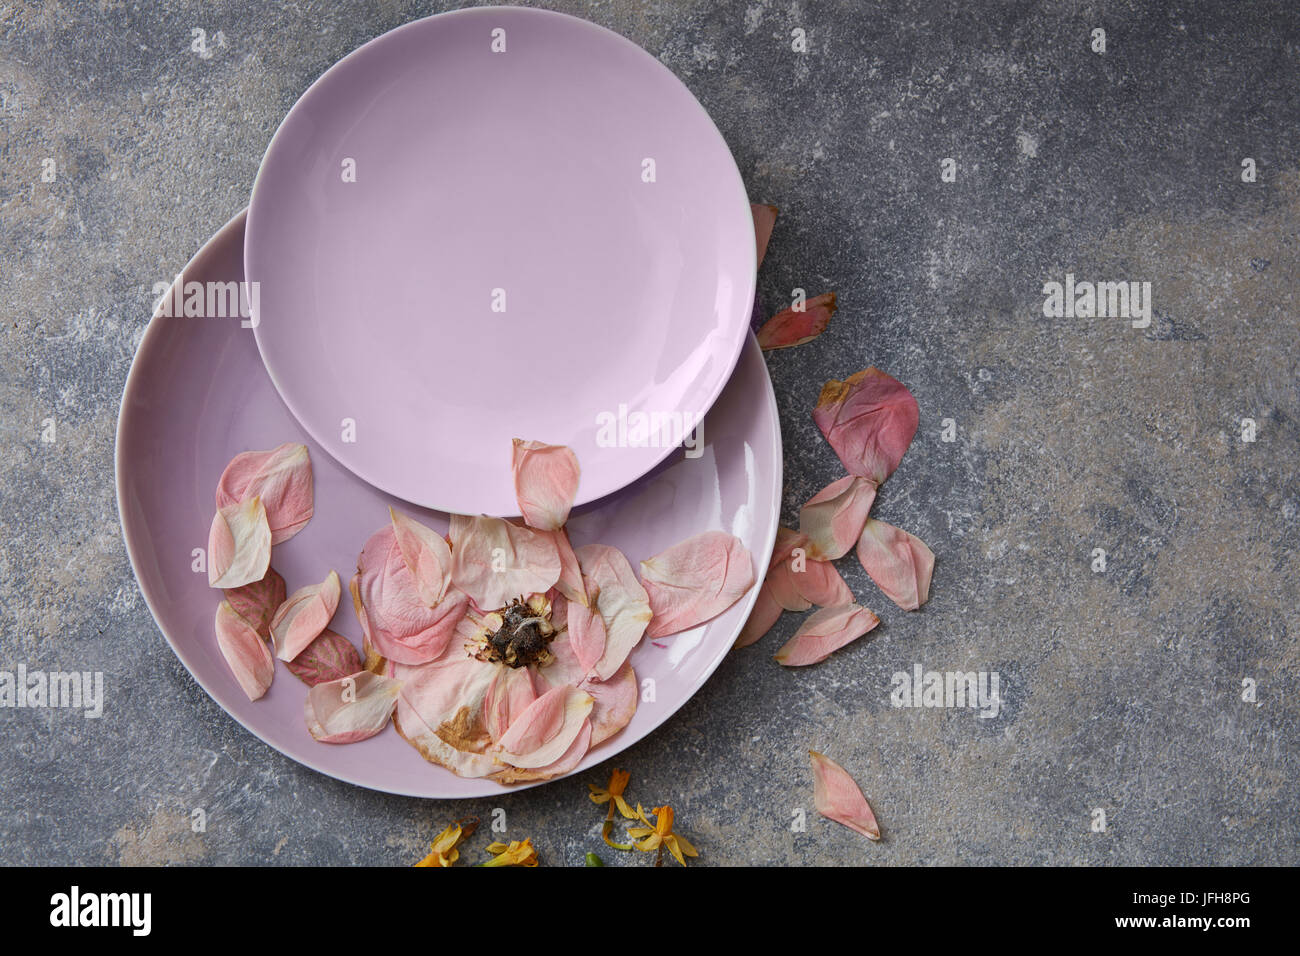 Dried petals on pink plates Stock Photo